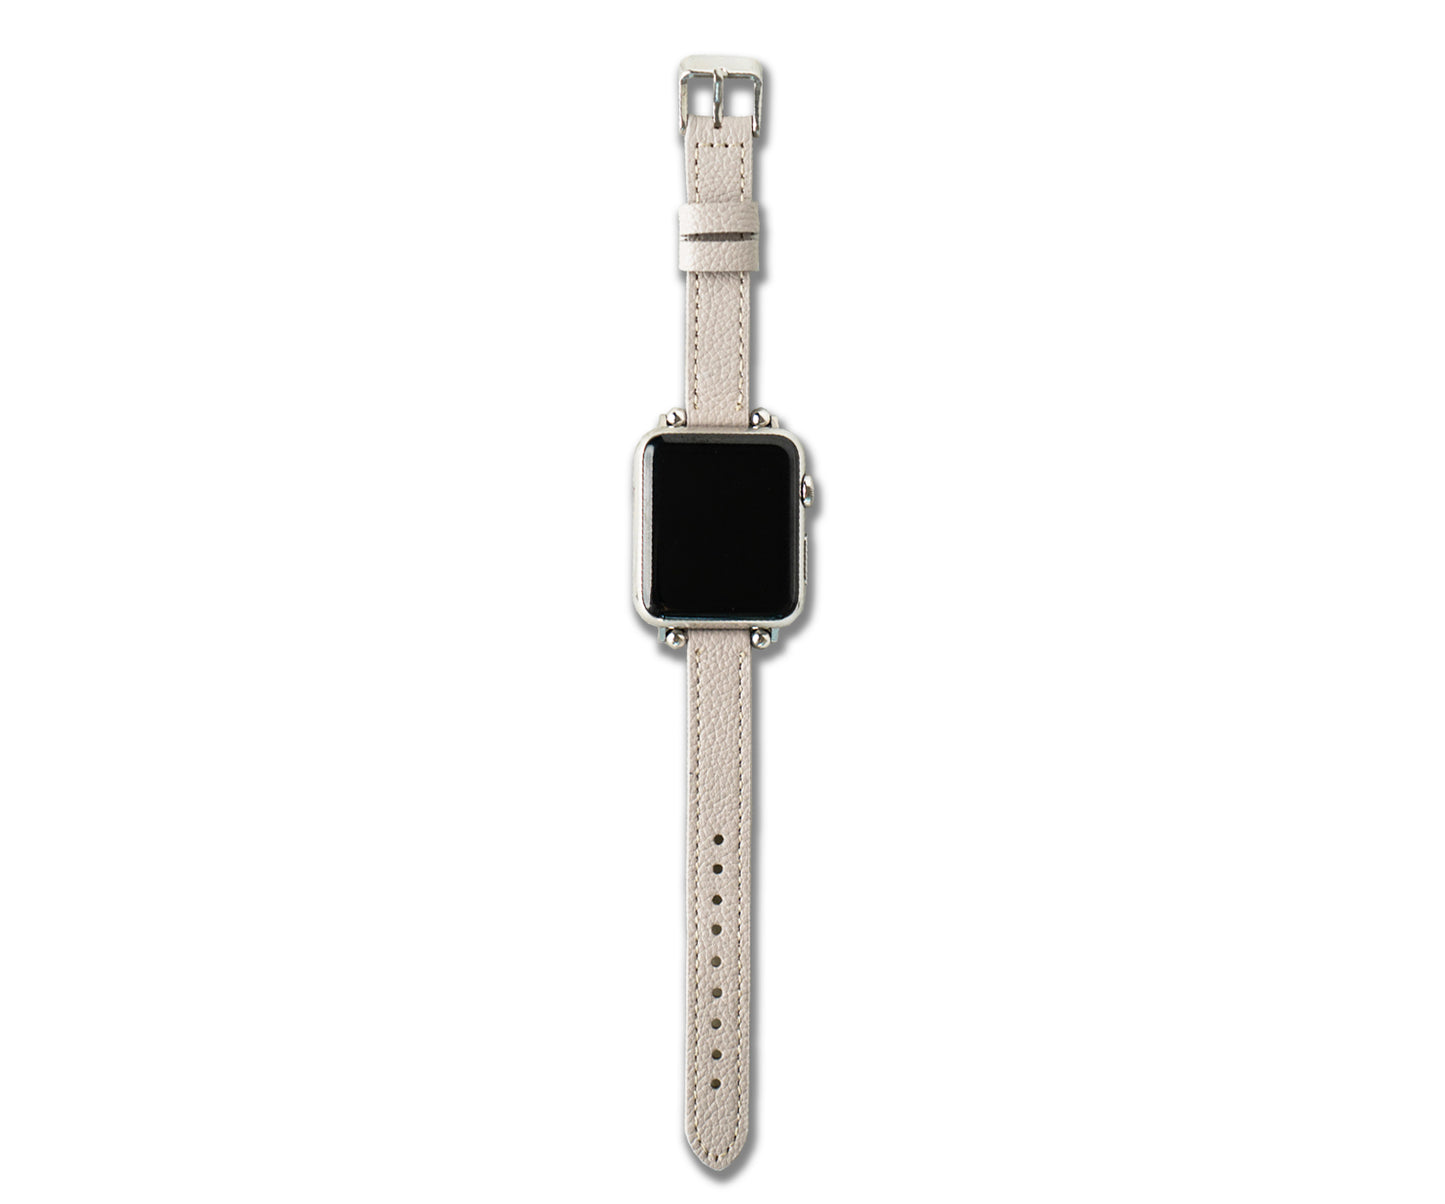 Minimalist Leather Band for Apple Watch